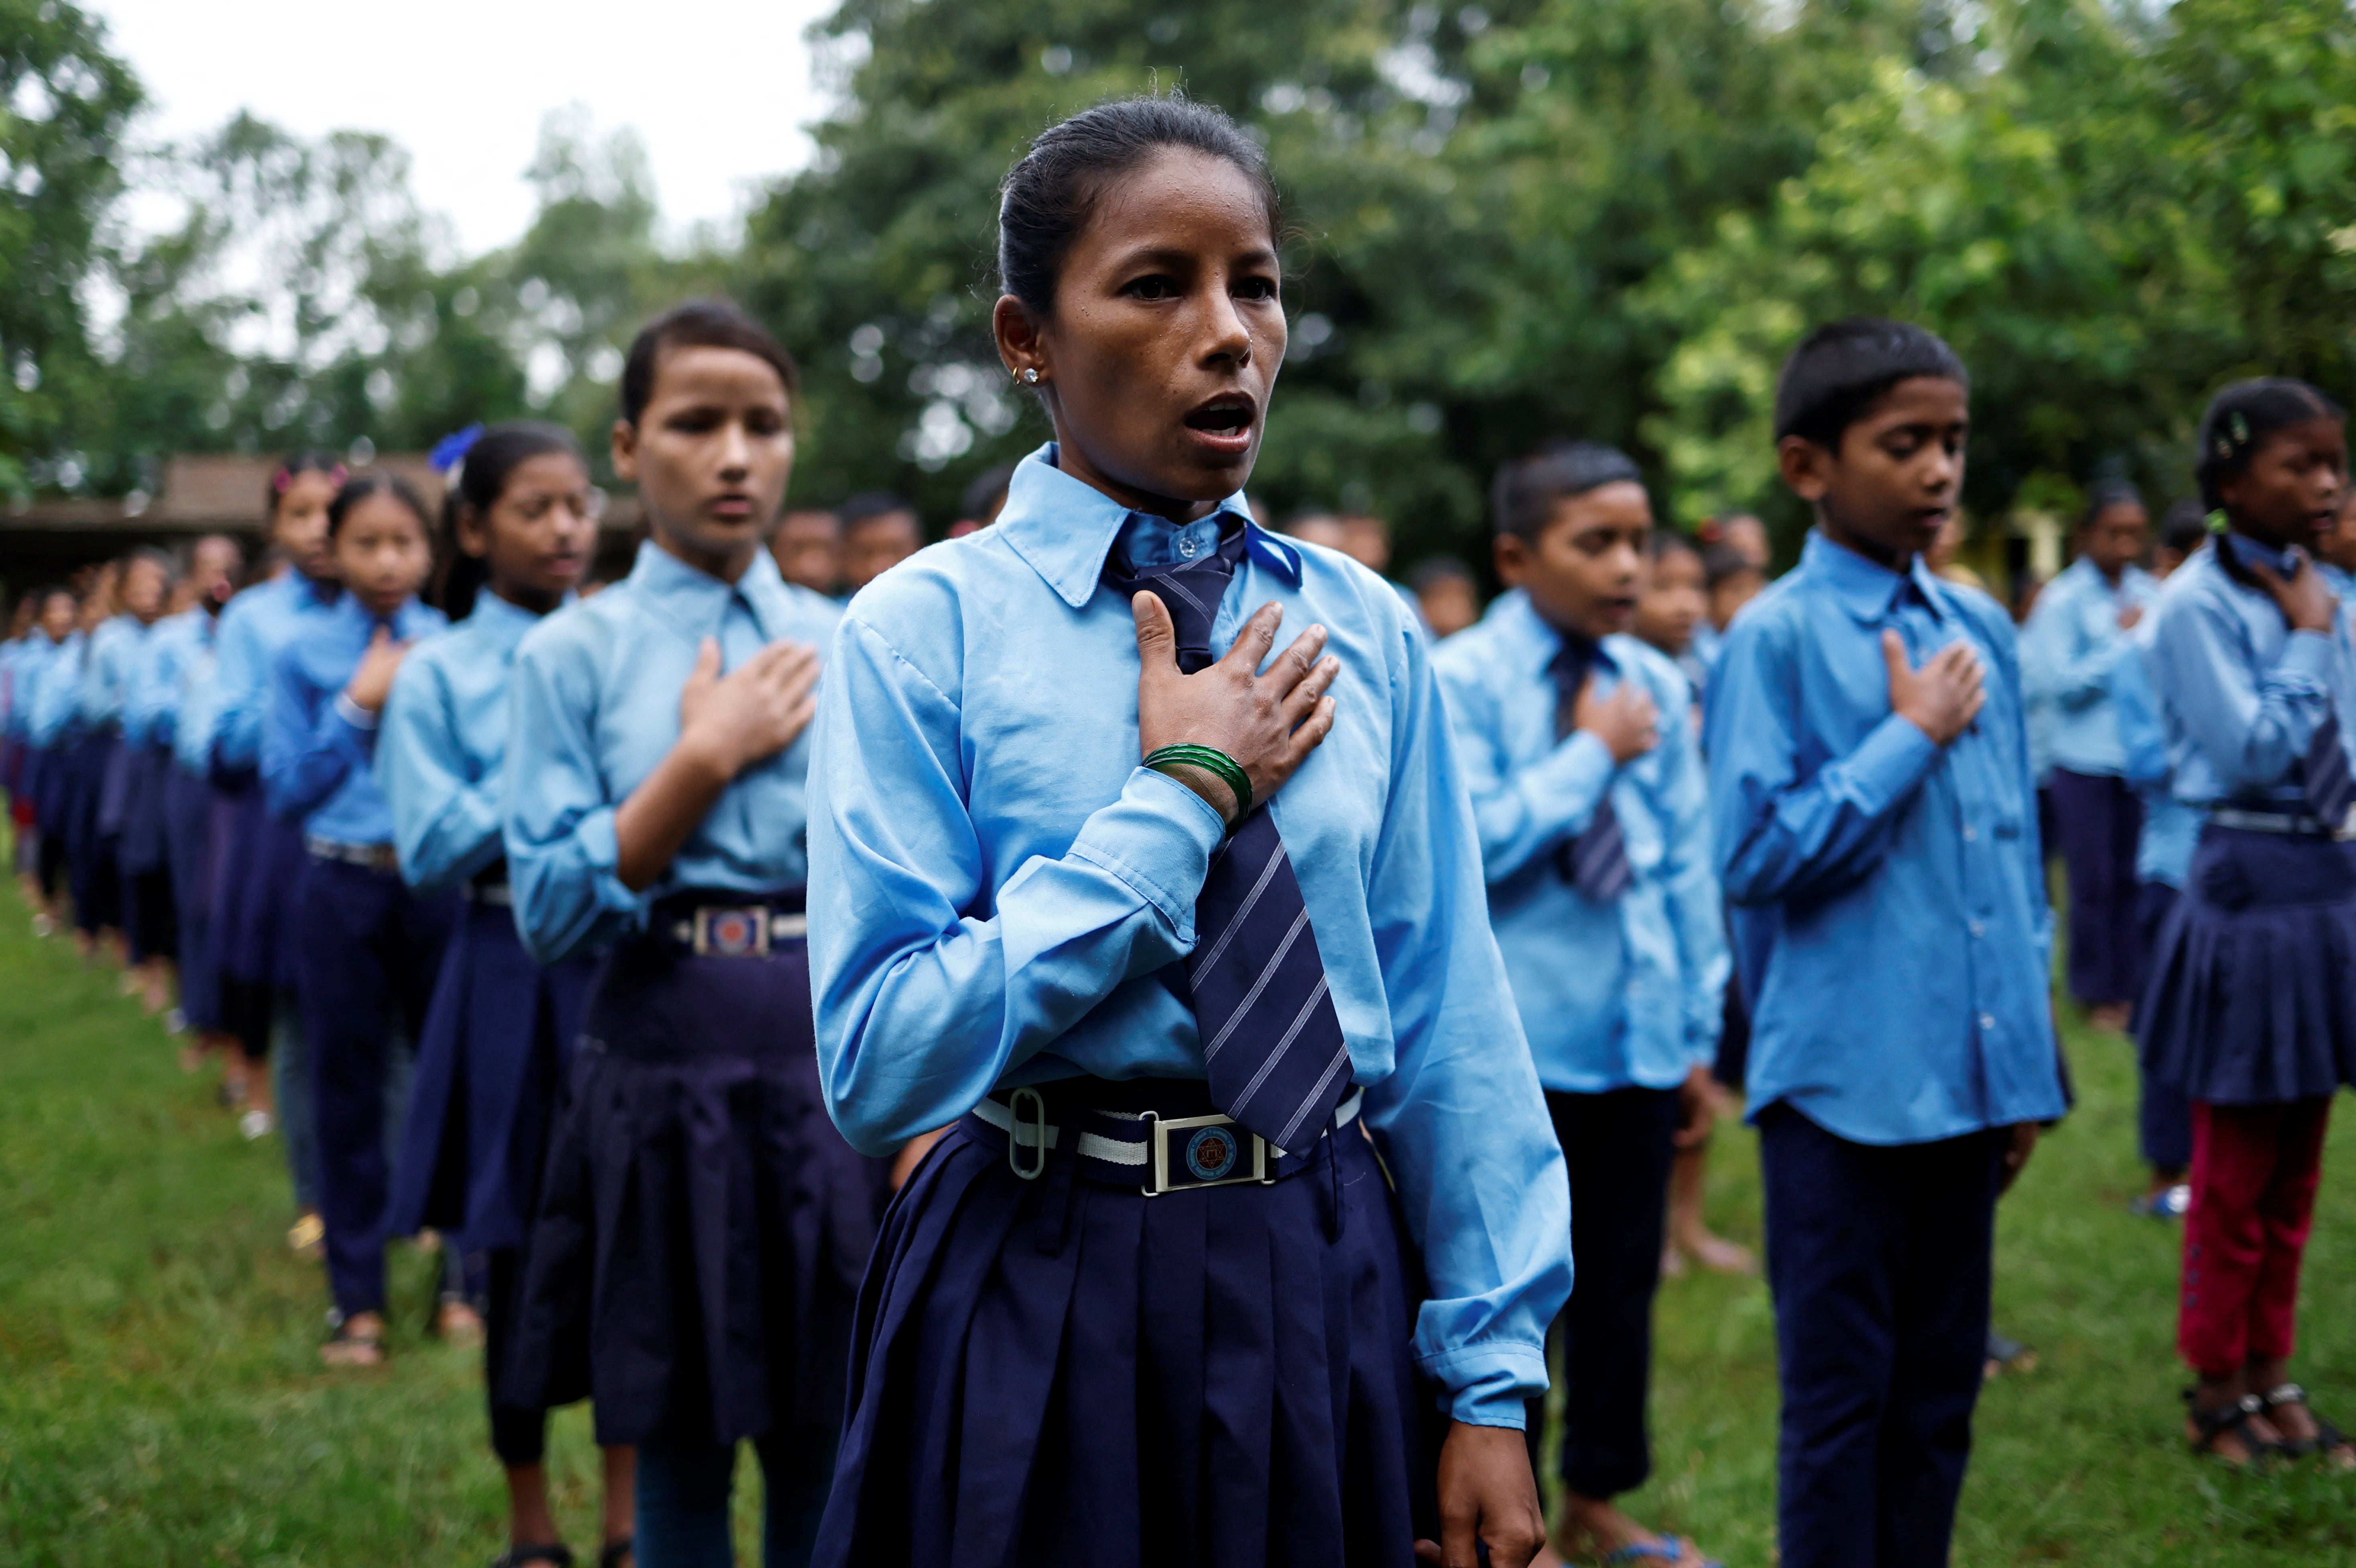 Parwati Sunar, 27, sings the national anthem of Nepal during assembly at Jeevan Jyoti secondary school in Punarbas